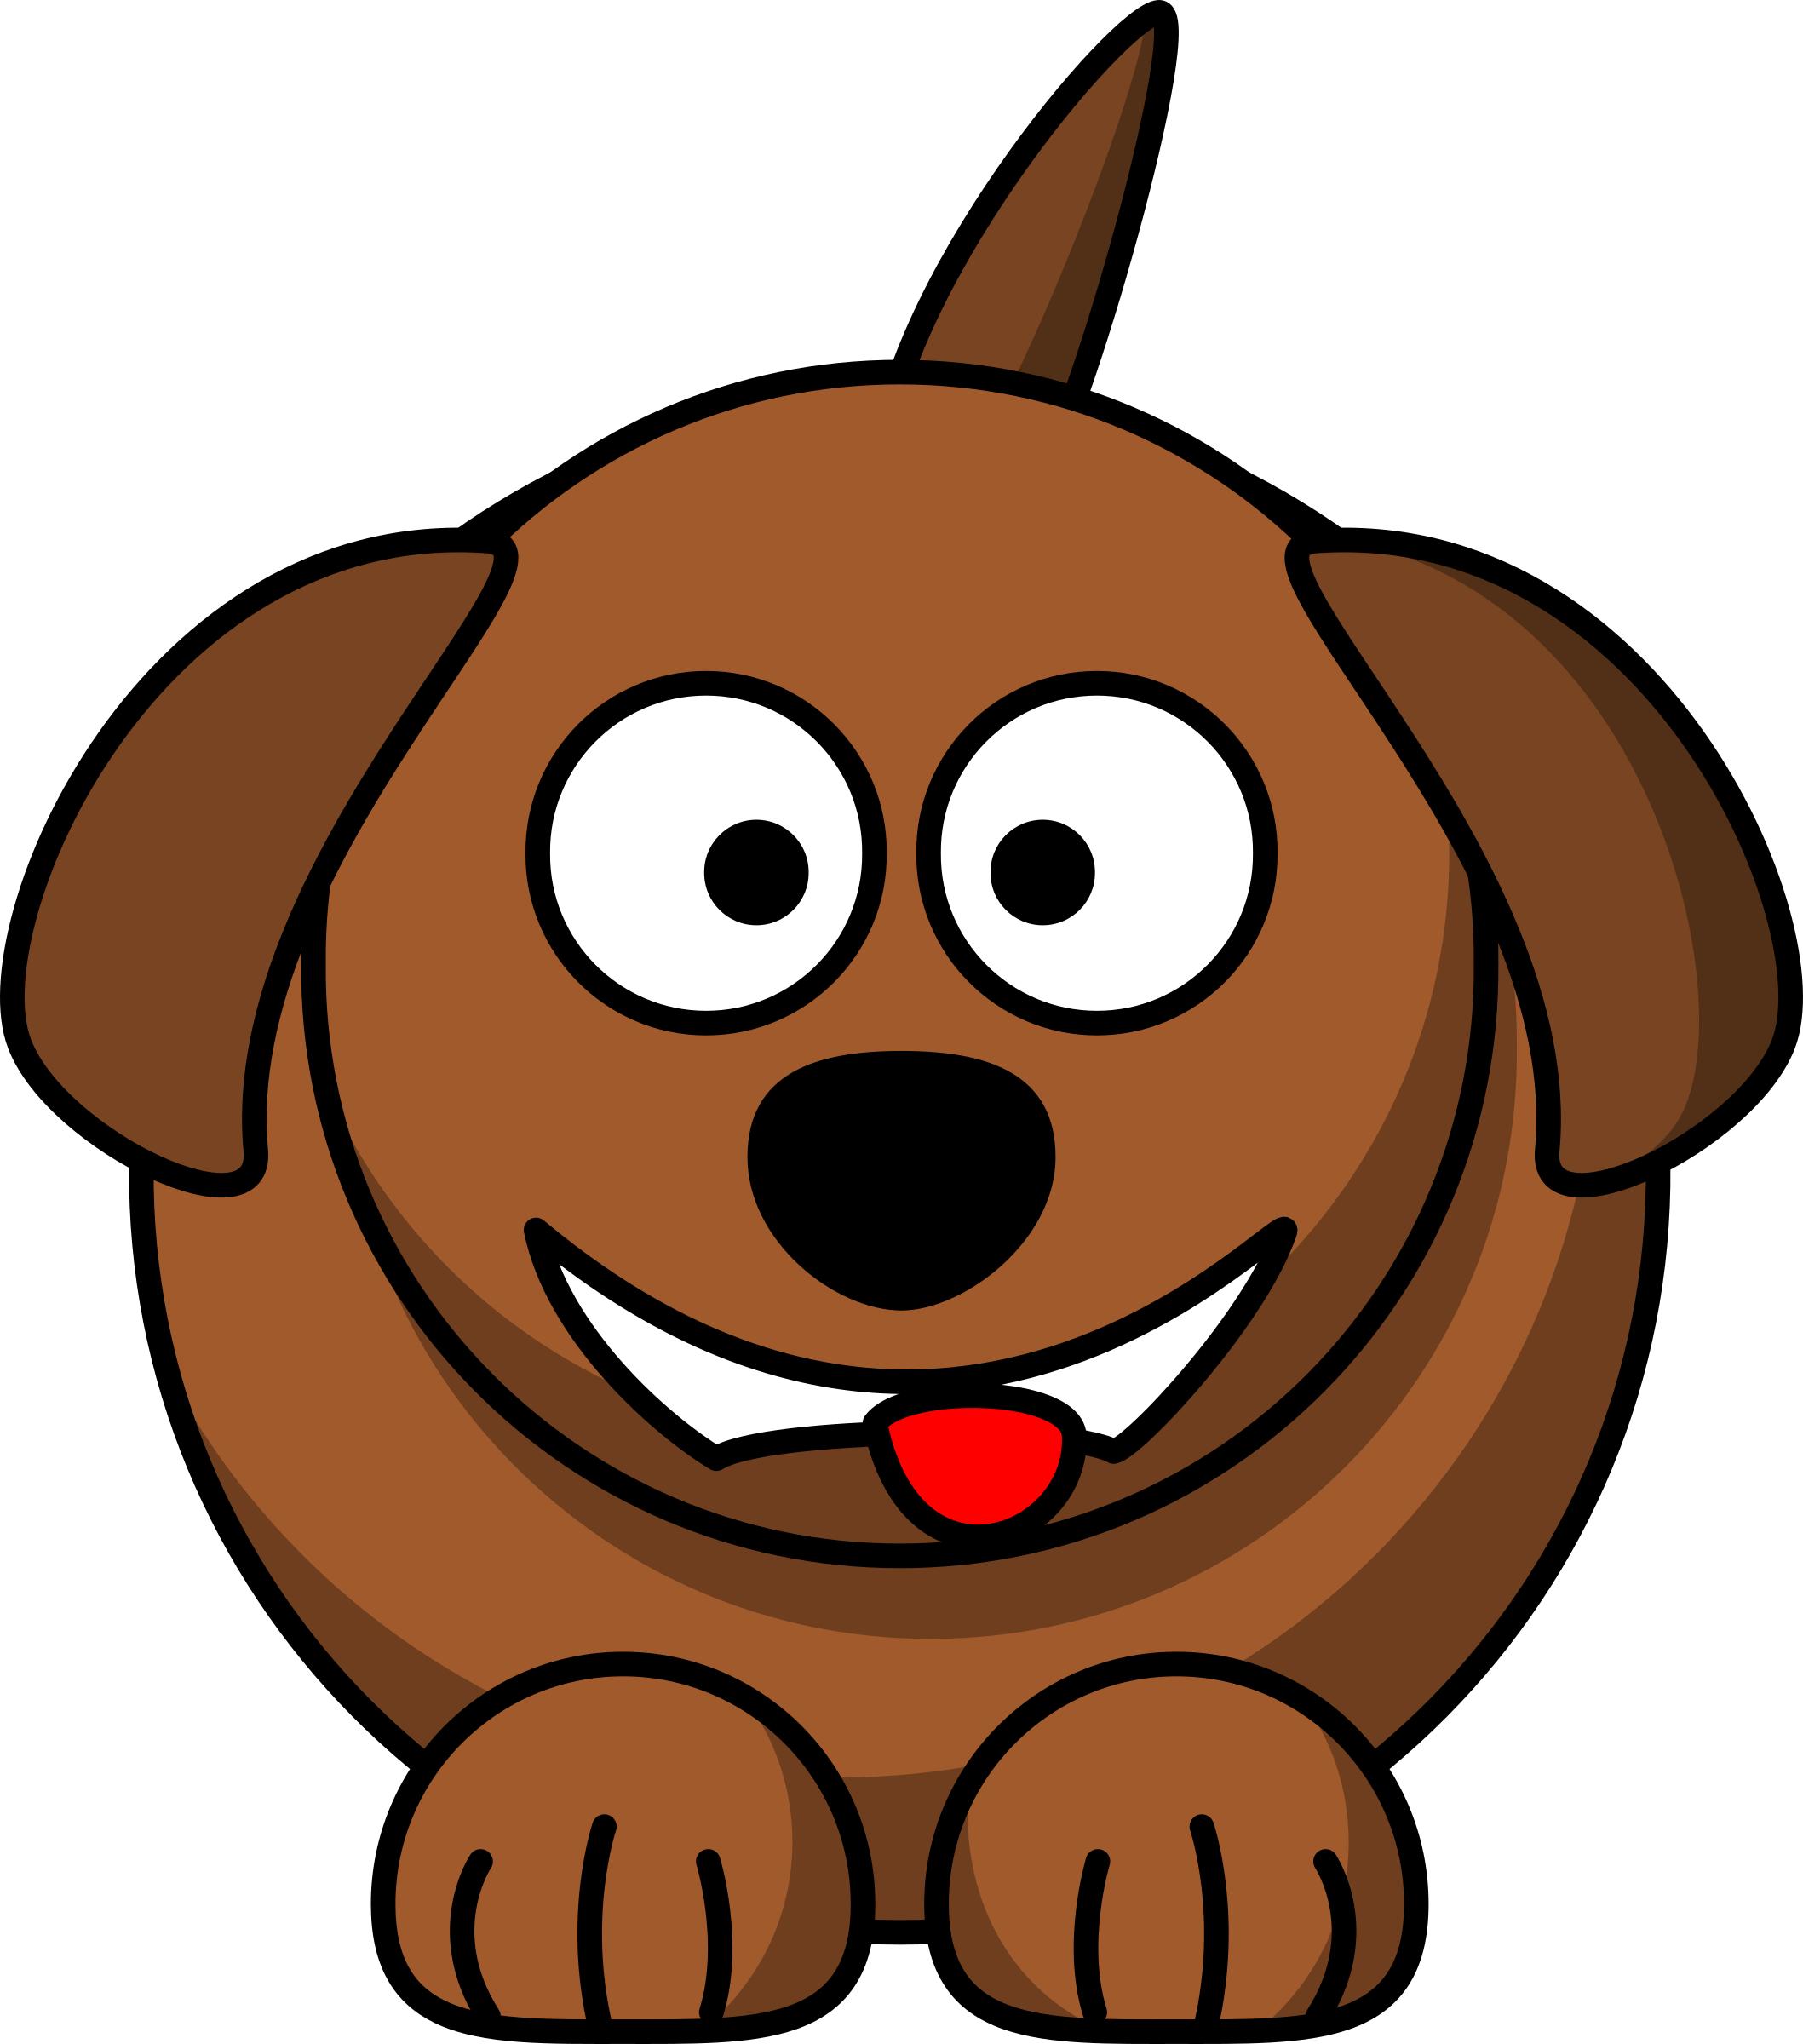 Cartoon dog laughing or smiling Icons PNG - Free PNG and Icons Downloads